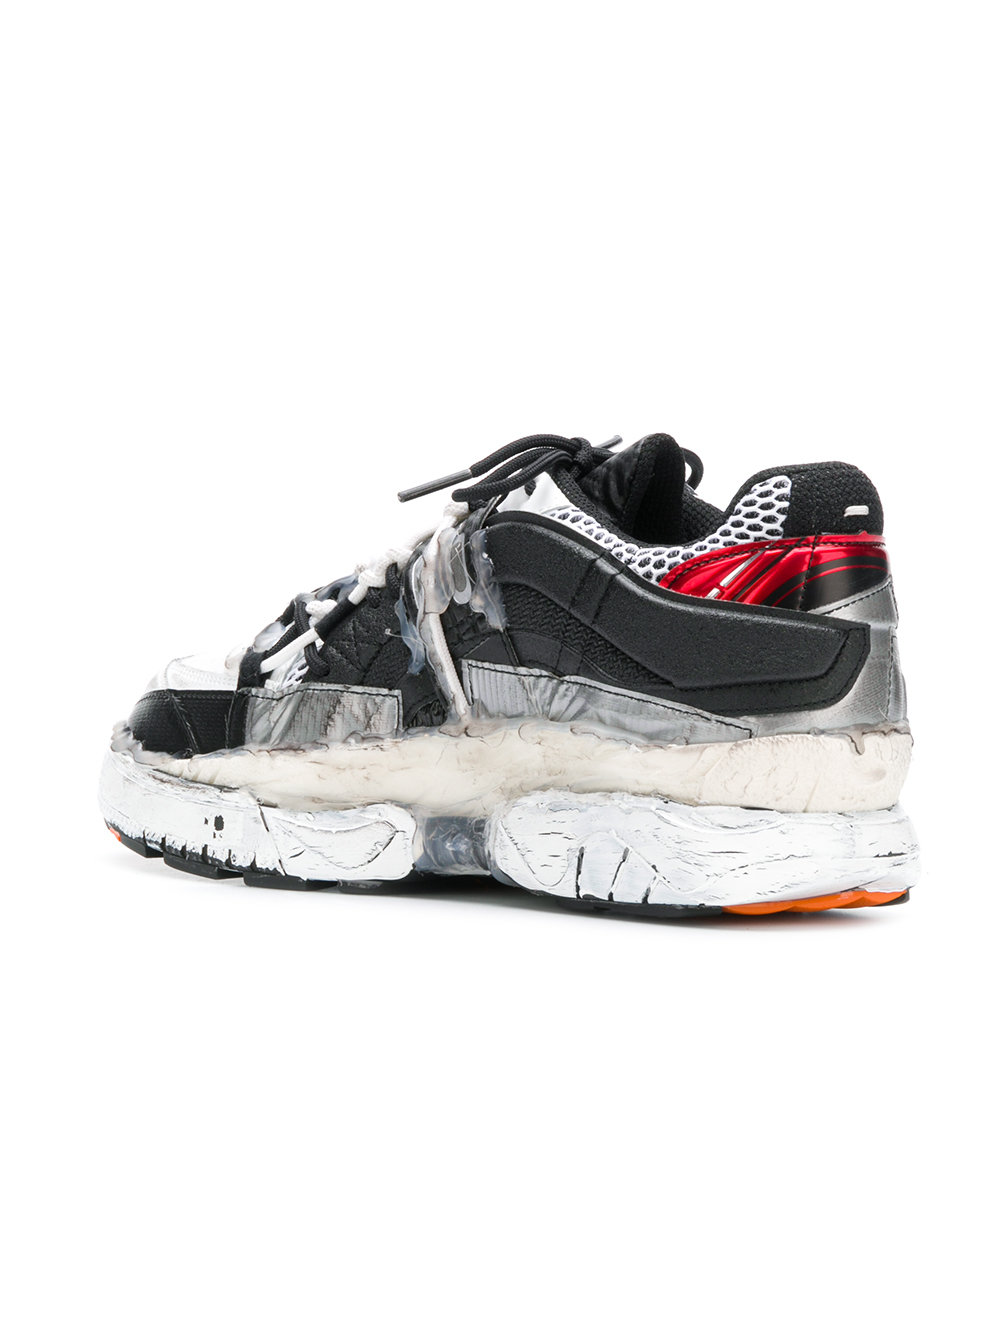 Maison Margiela Drops Extremely Distressed Fusion Sneaker From AW18 ...